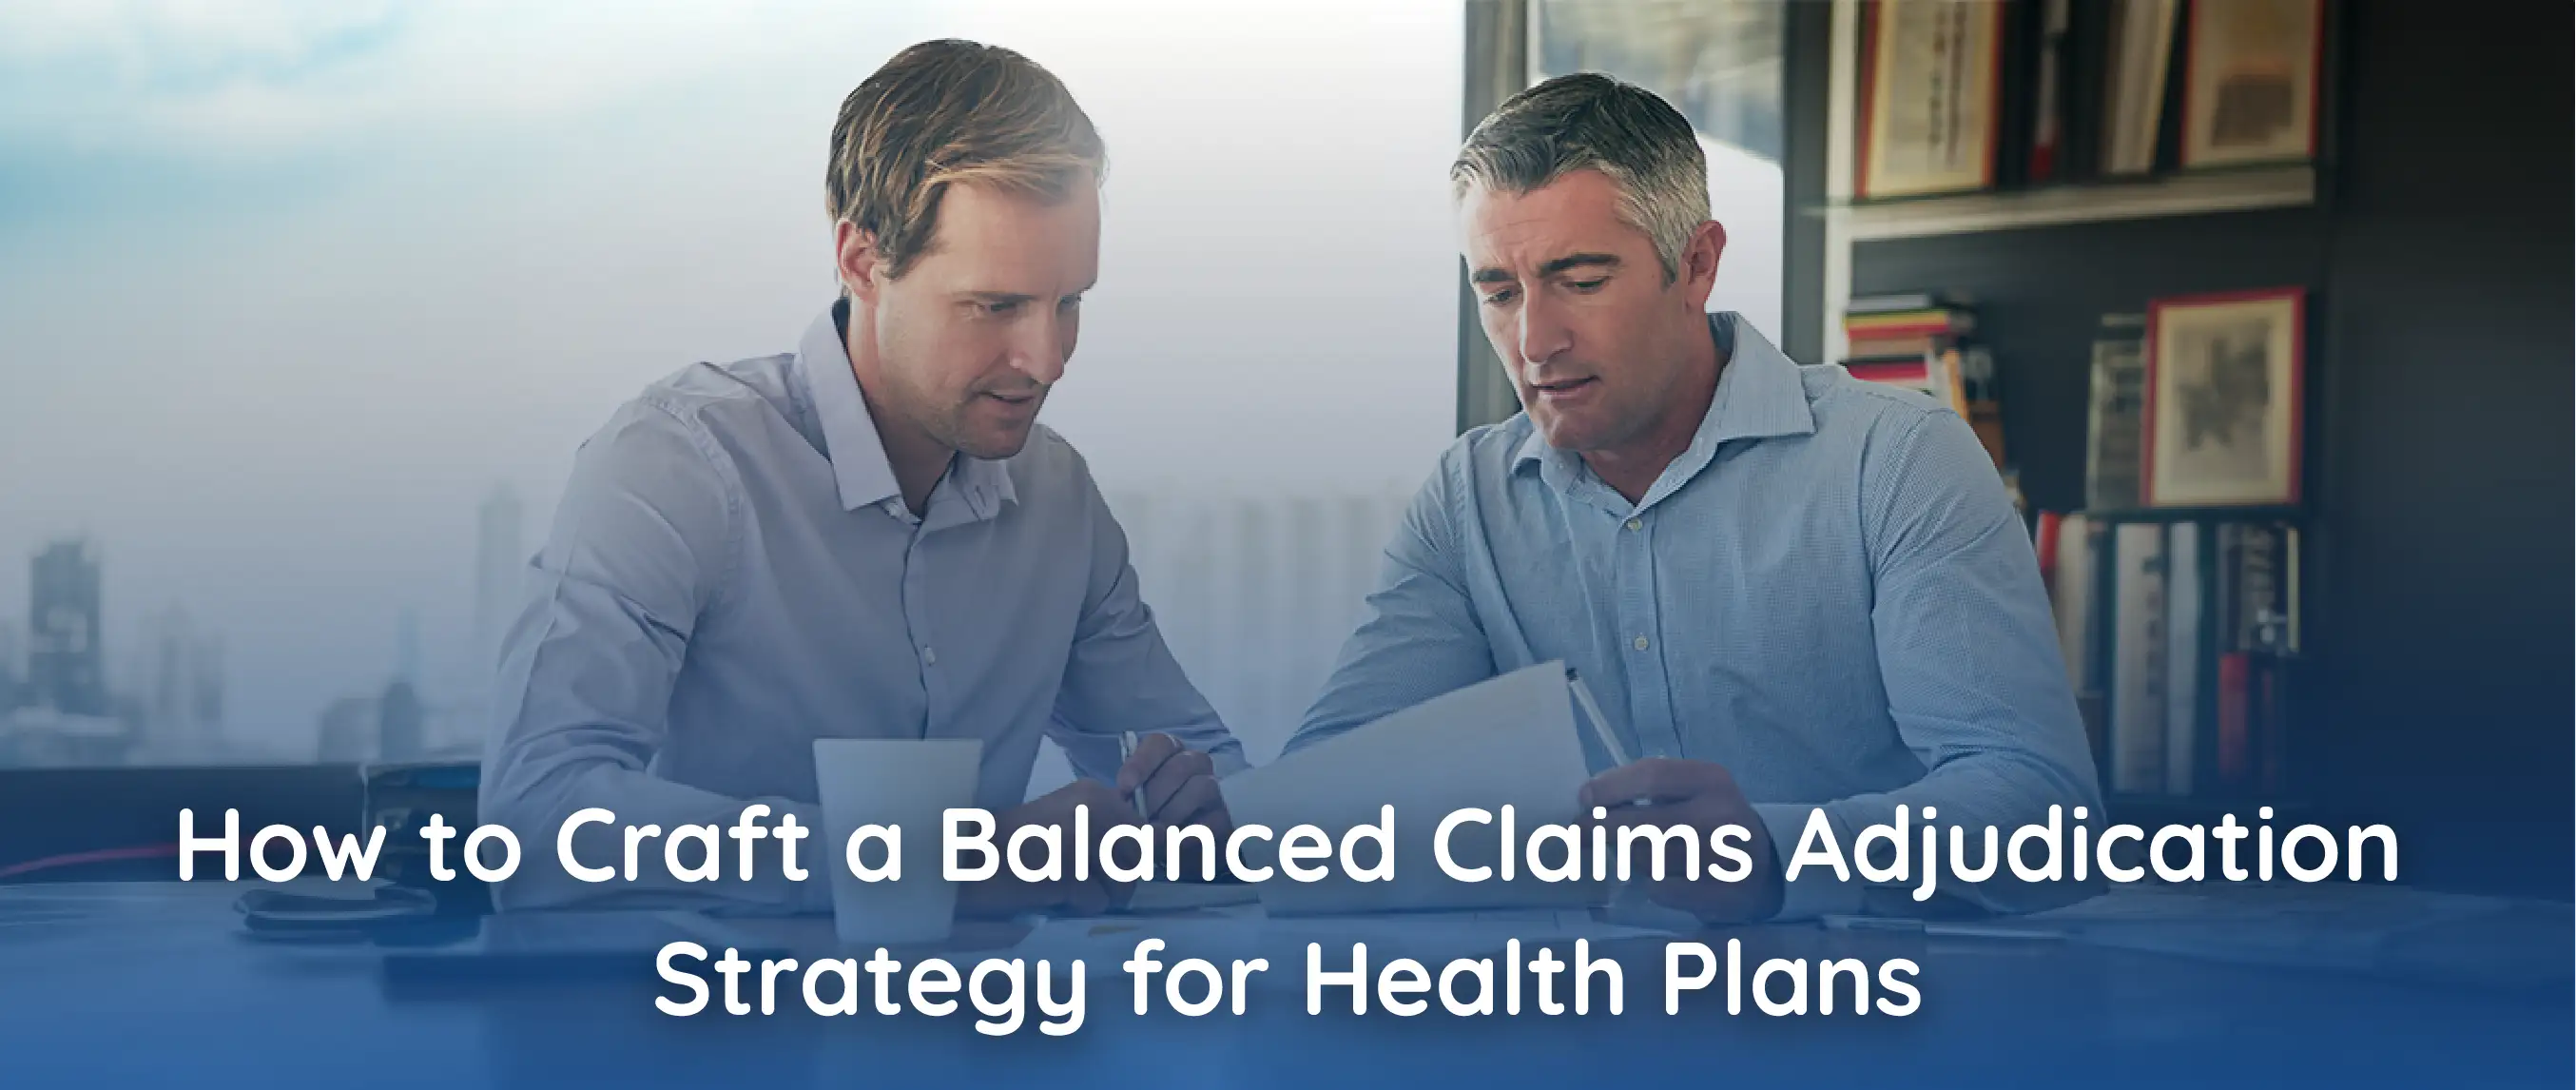 How to Craft a Balanced Claims Adjudication Strategy for Health Plans 